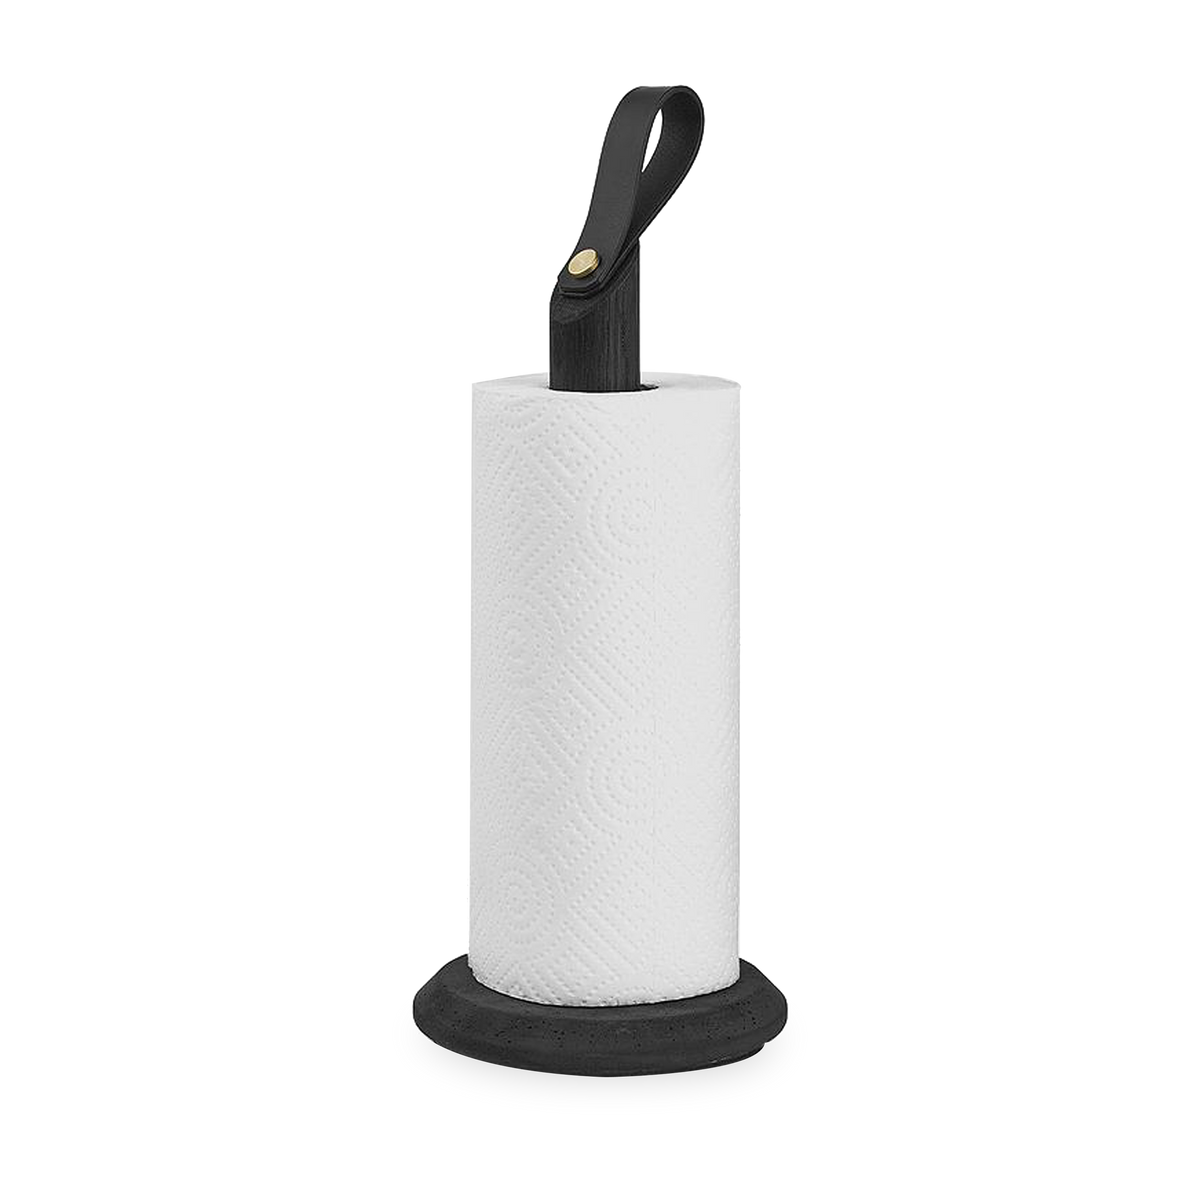 Beautifully designed and crafted, the Grab Paper Towel Holder combines genuine high-quality materials with exceptional Scandinavian design to create a kitchen roll holder that take